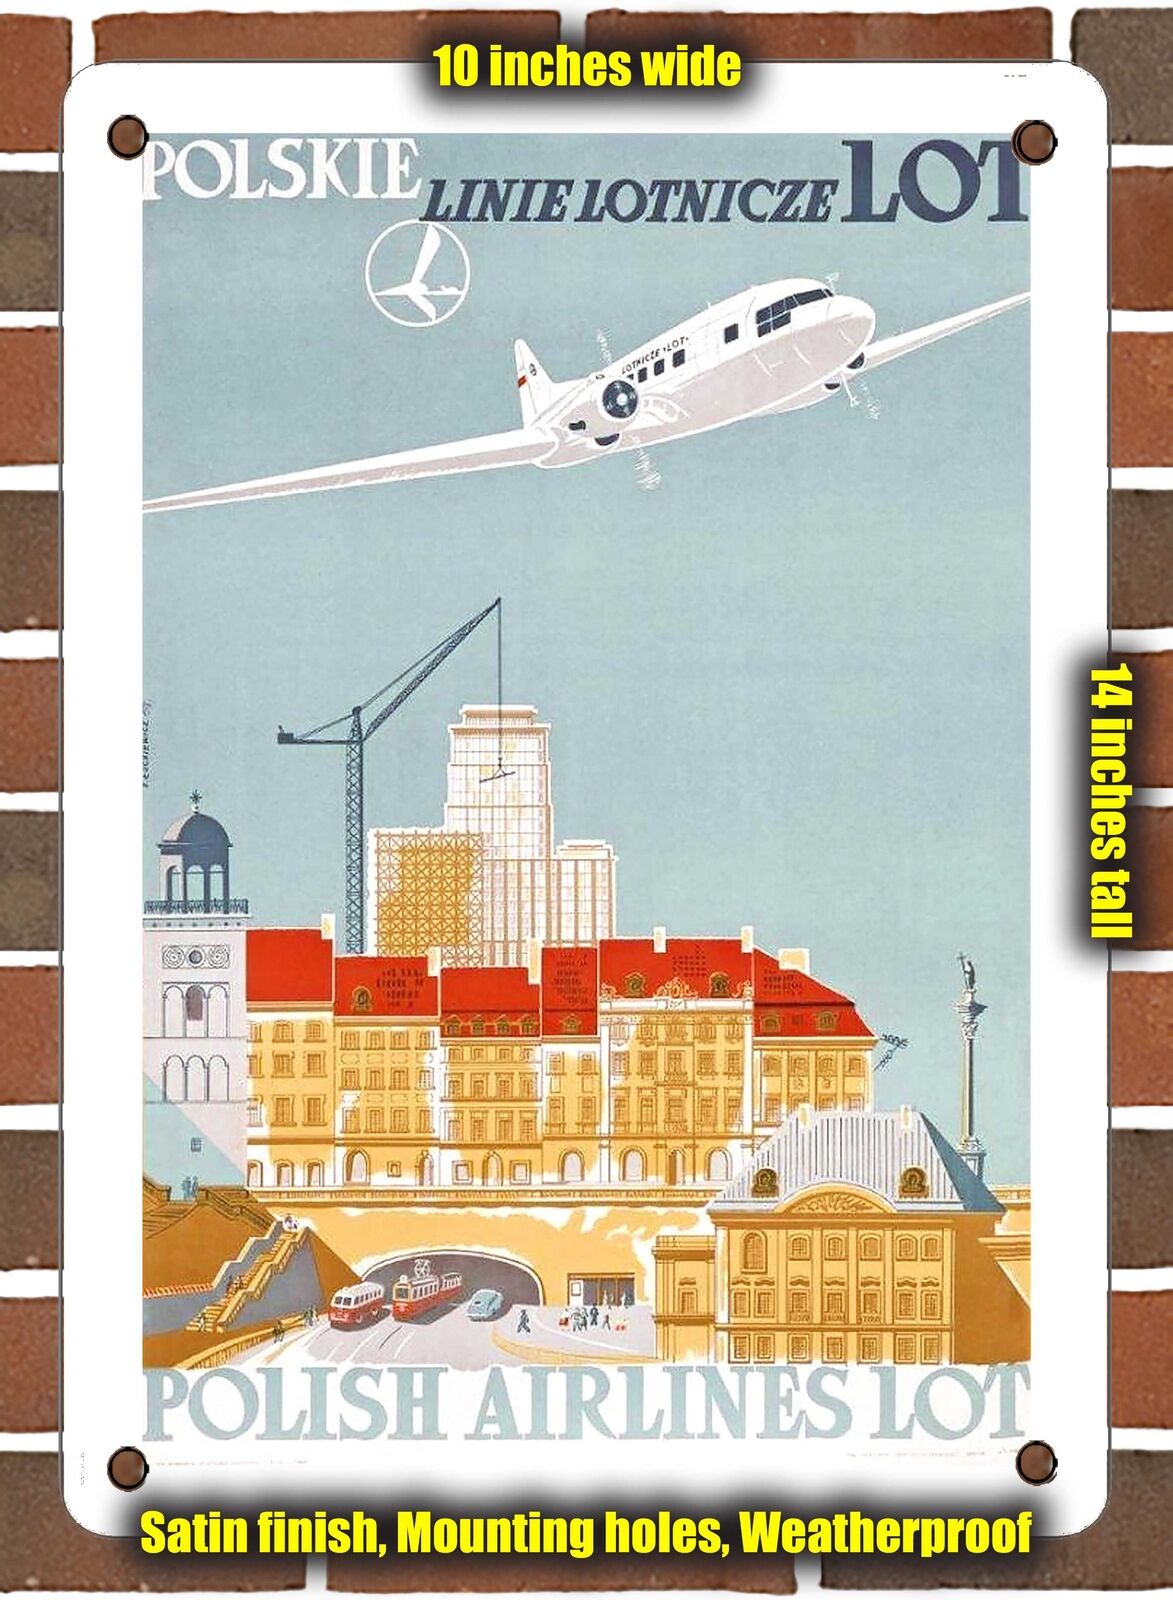 METAL SIGN - 1951 Polskie Linie Lotnicze LOT Polish Airlines, LOT - 10x14 Inches